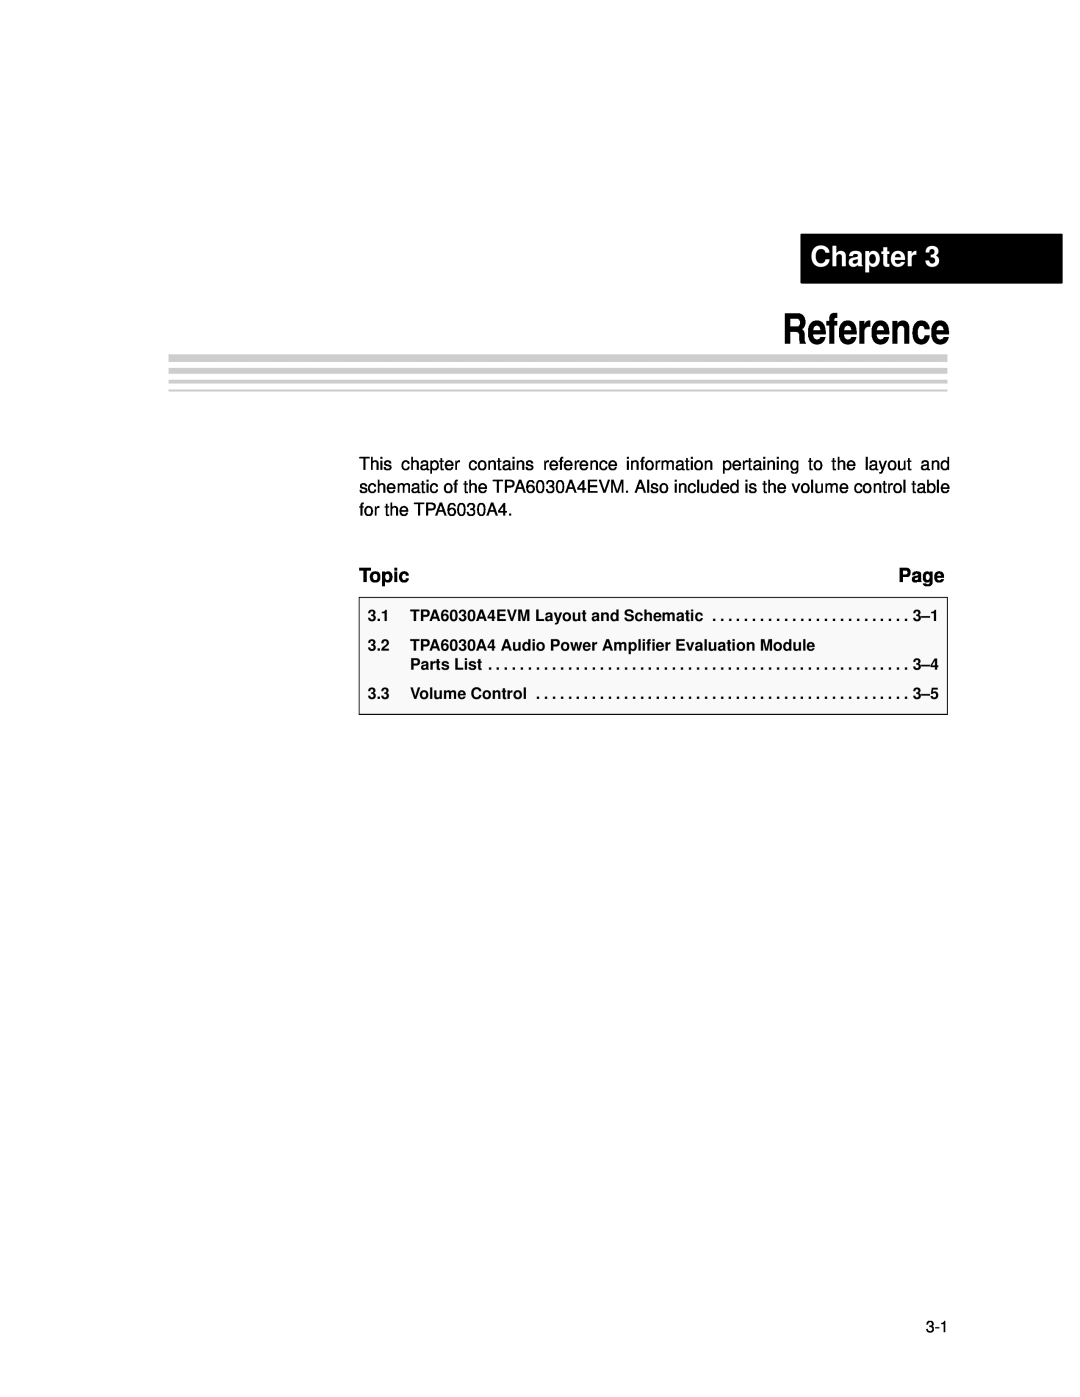 Texas Instruments TPA6030A4 manual Reference, Chapter, Page, Topic 